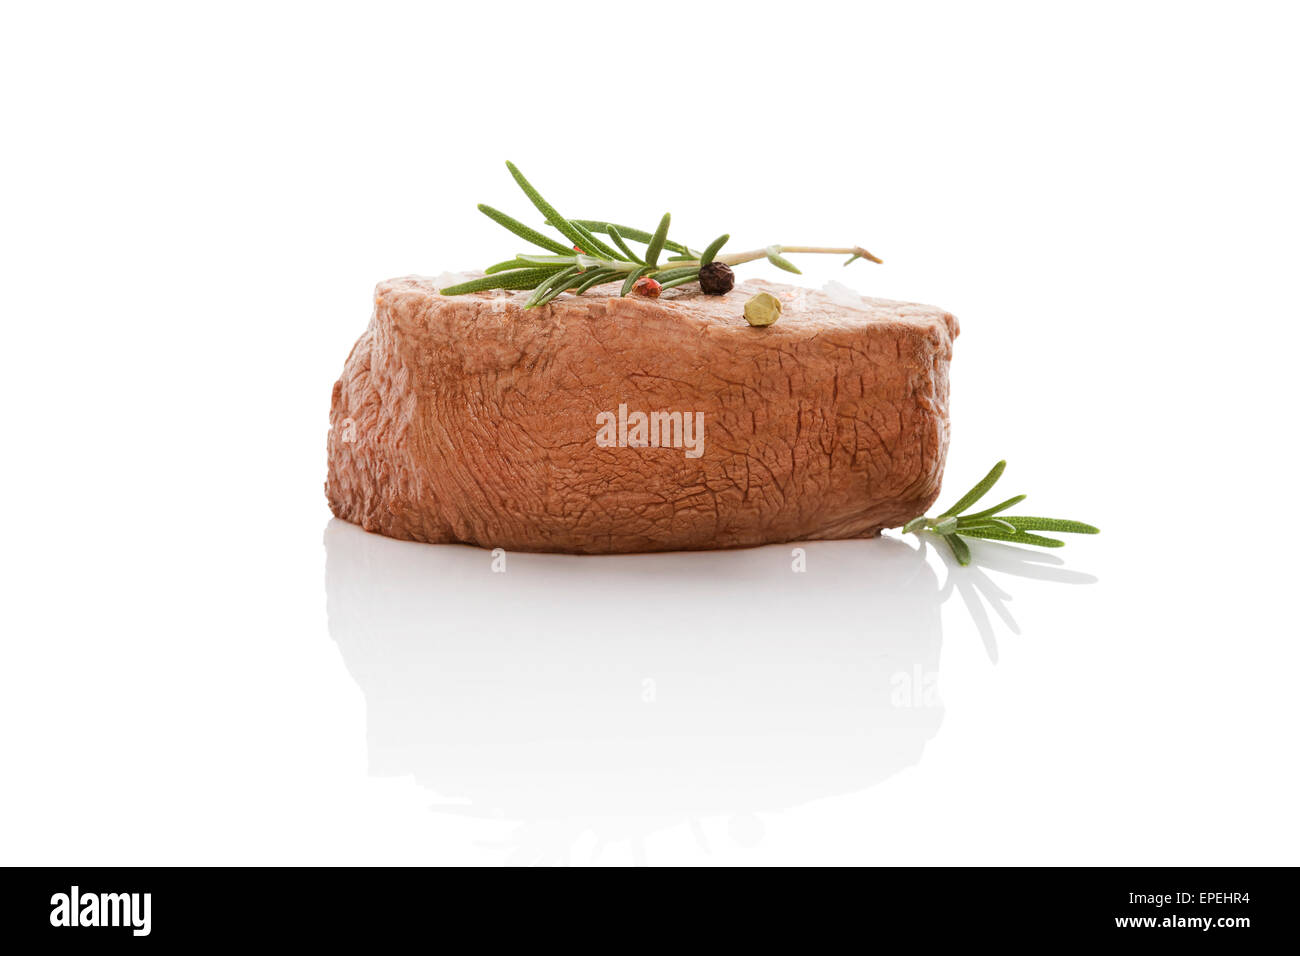 Luxurious grilled big steak with fresh rosemary herb isolated on white background. Culinary beefsteak eating. Paleo diet. Stock Photo